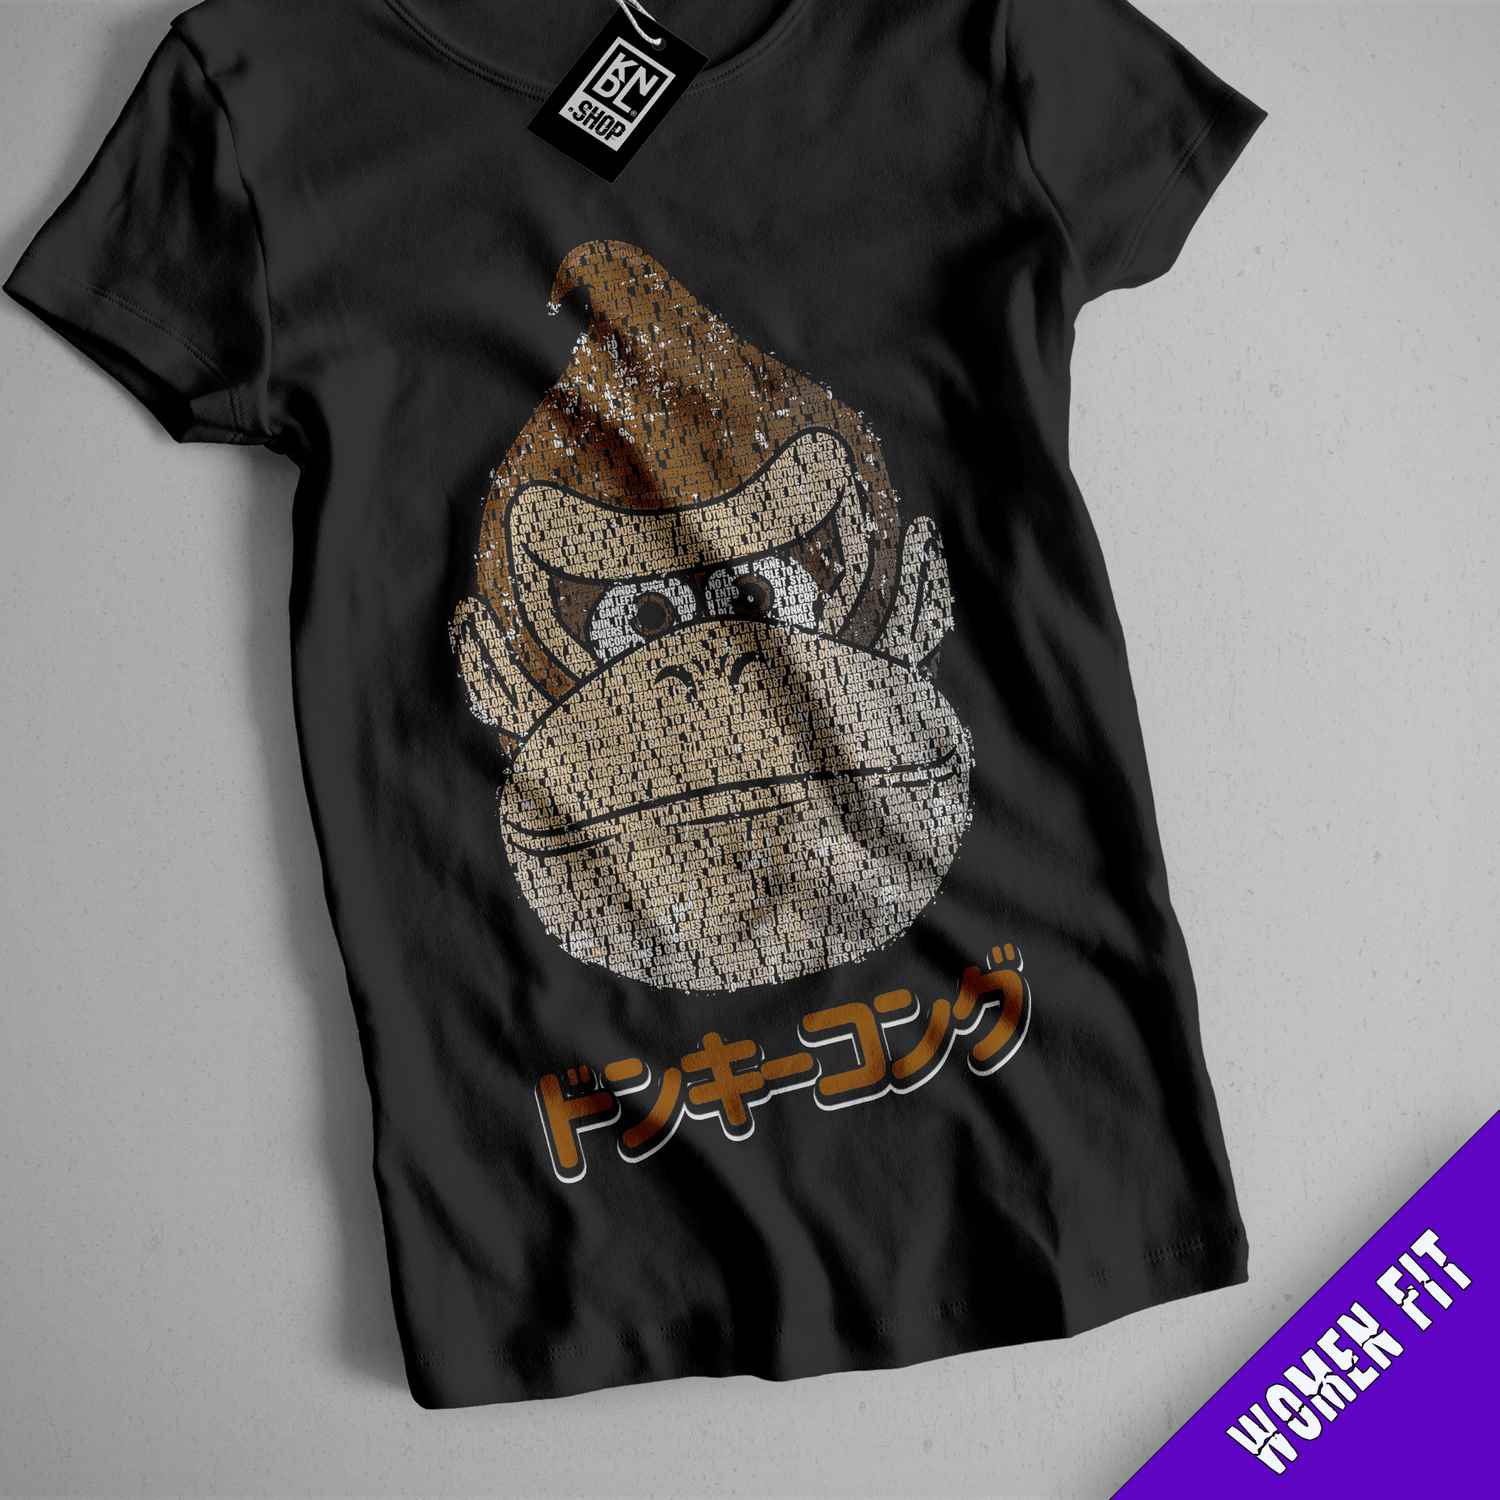 a t - shirt with a monkey wearing a hat